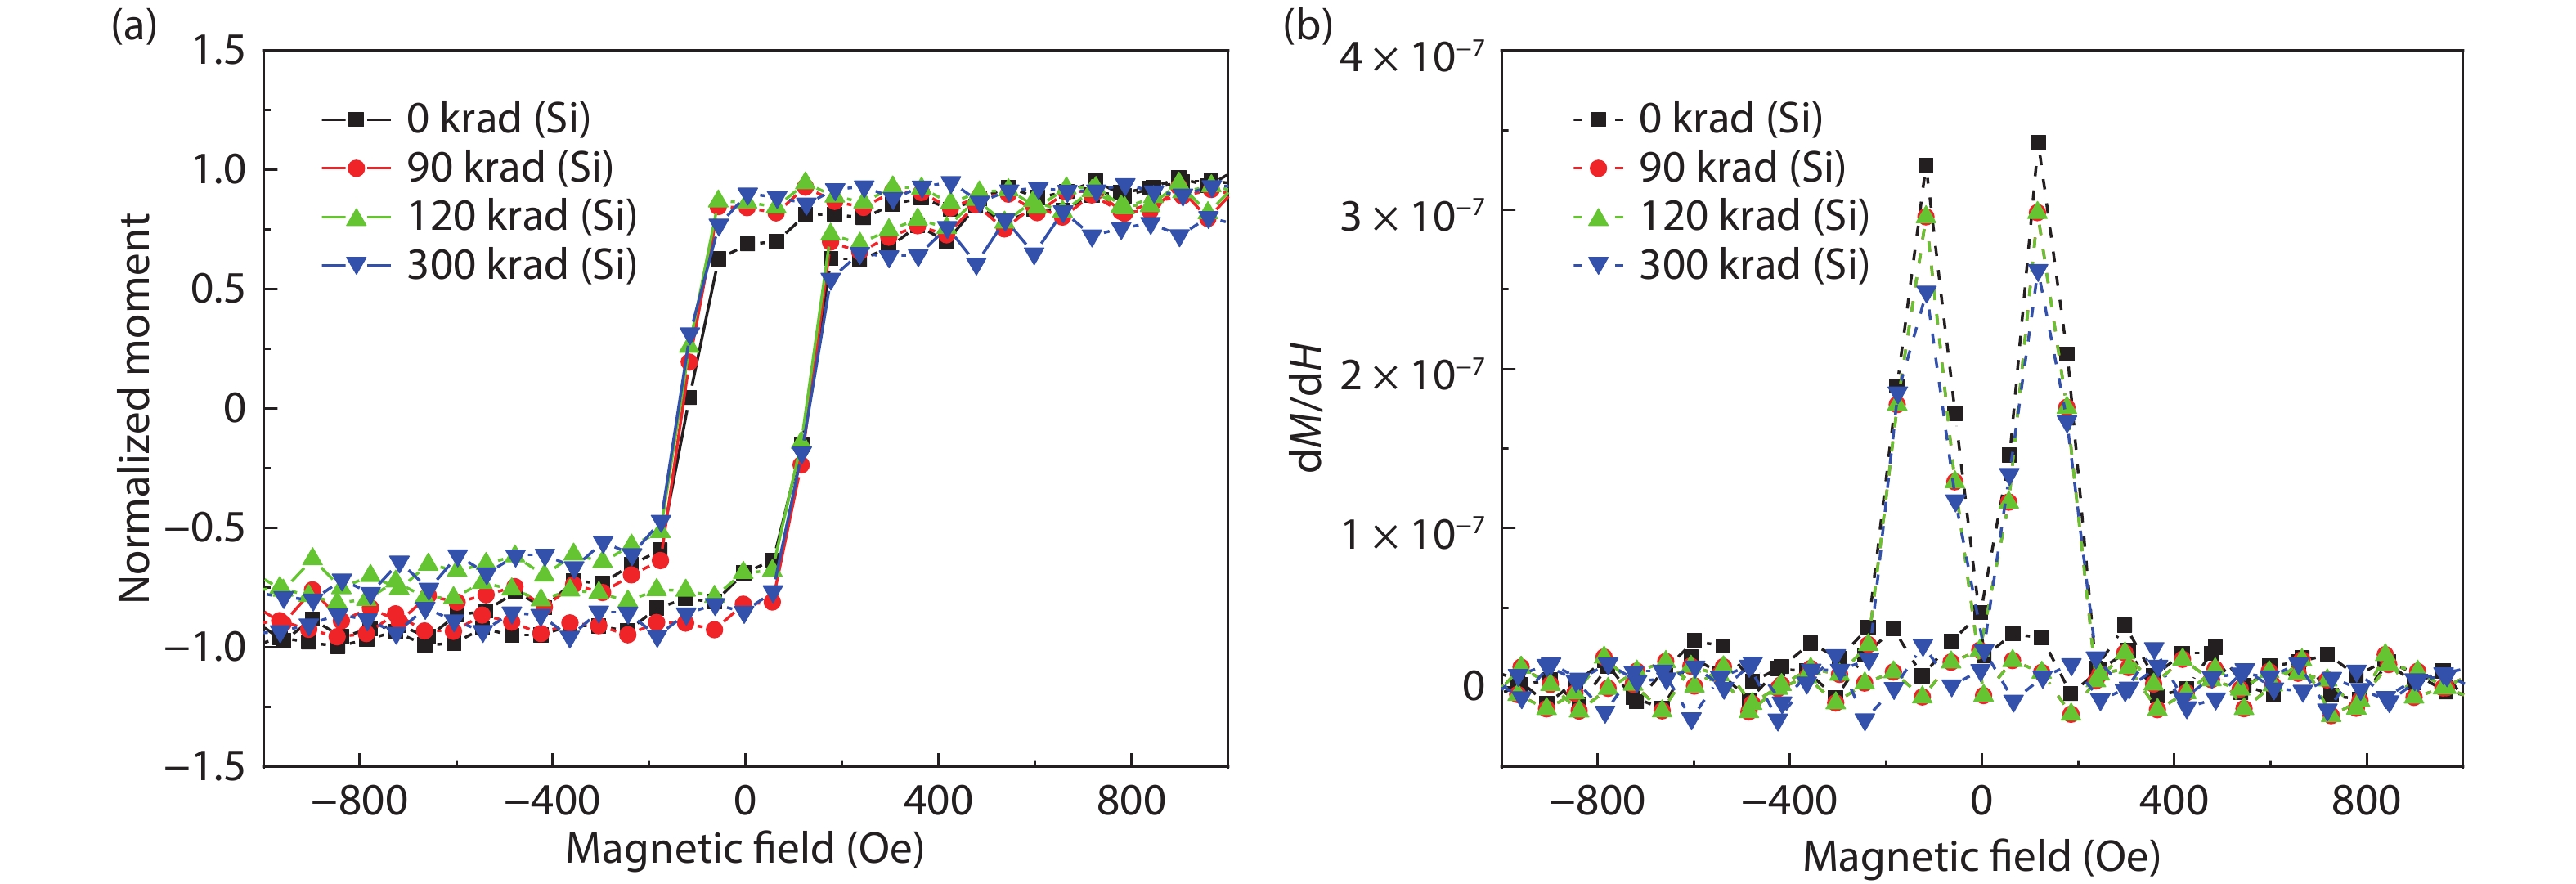 (Color online) (a) The normalized hysteresis loops of SOT magnetic films under different radiation doses. (b) The differential curves of SOT magnetic films hysteresis loops under different radiation doses. The magnetic field sweep rate is 15 Oe/s. All the experiments are performed at room temperature.